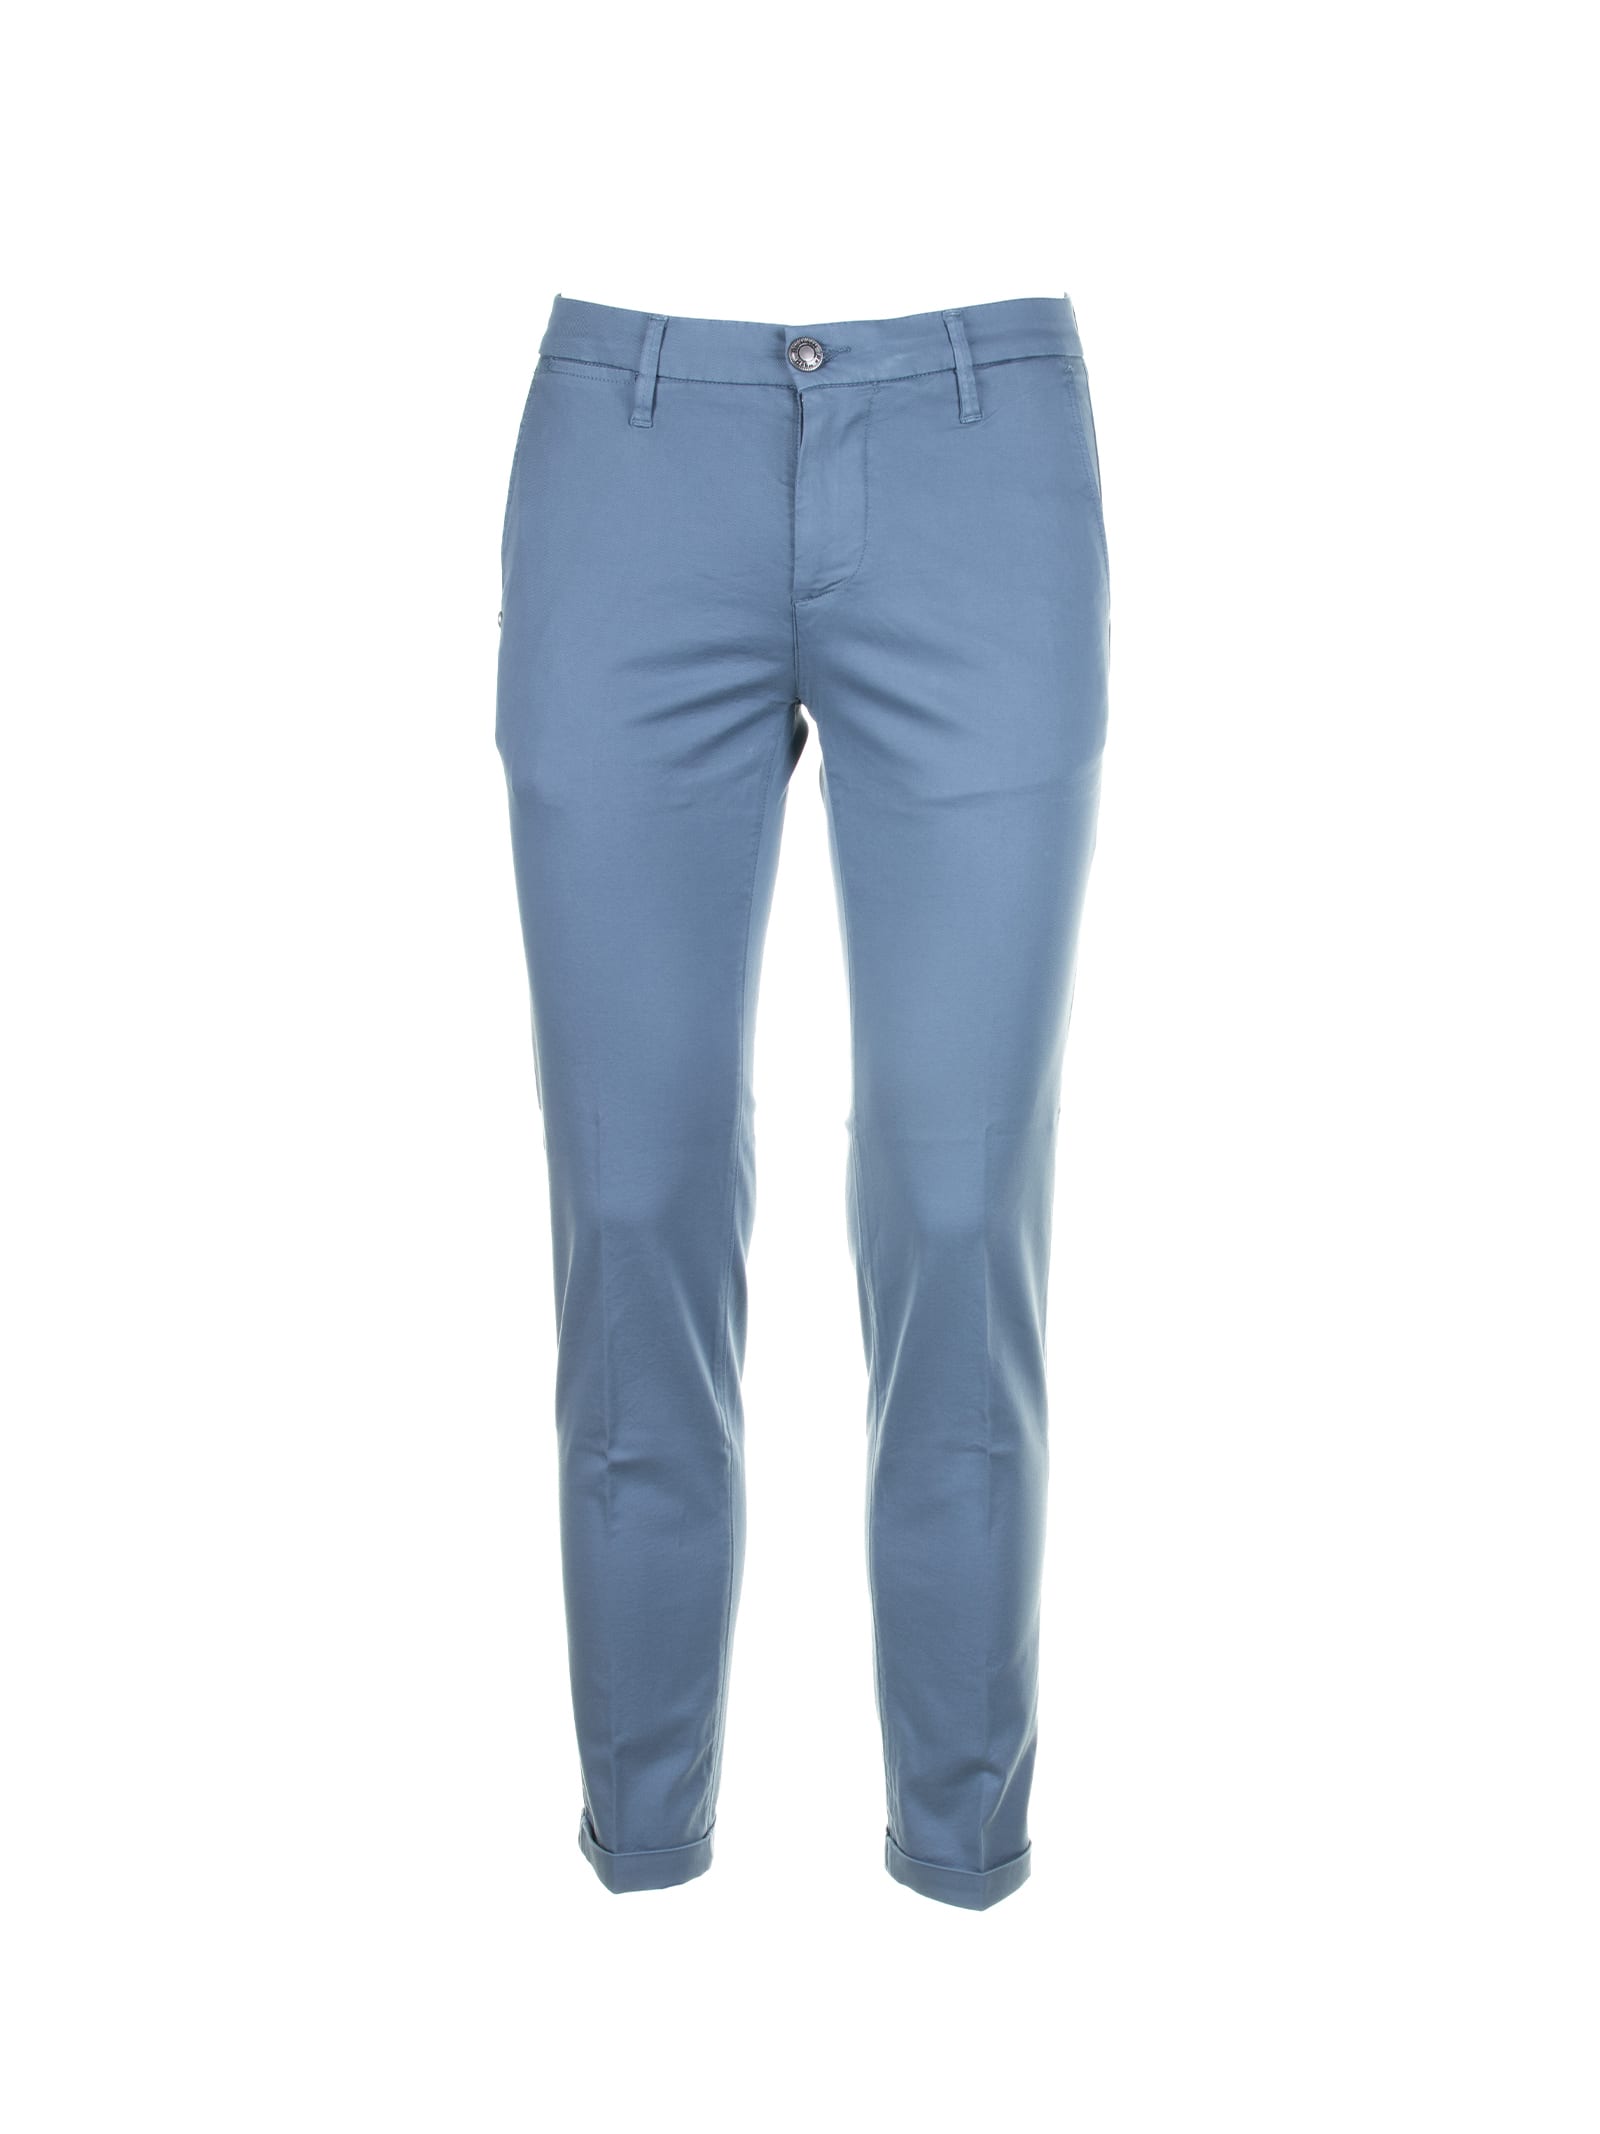 Re-HasH Light Blue Chino Trousers